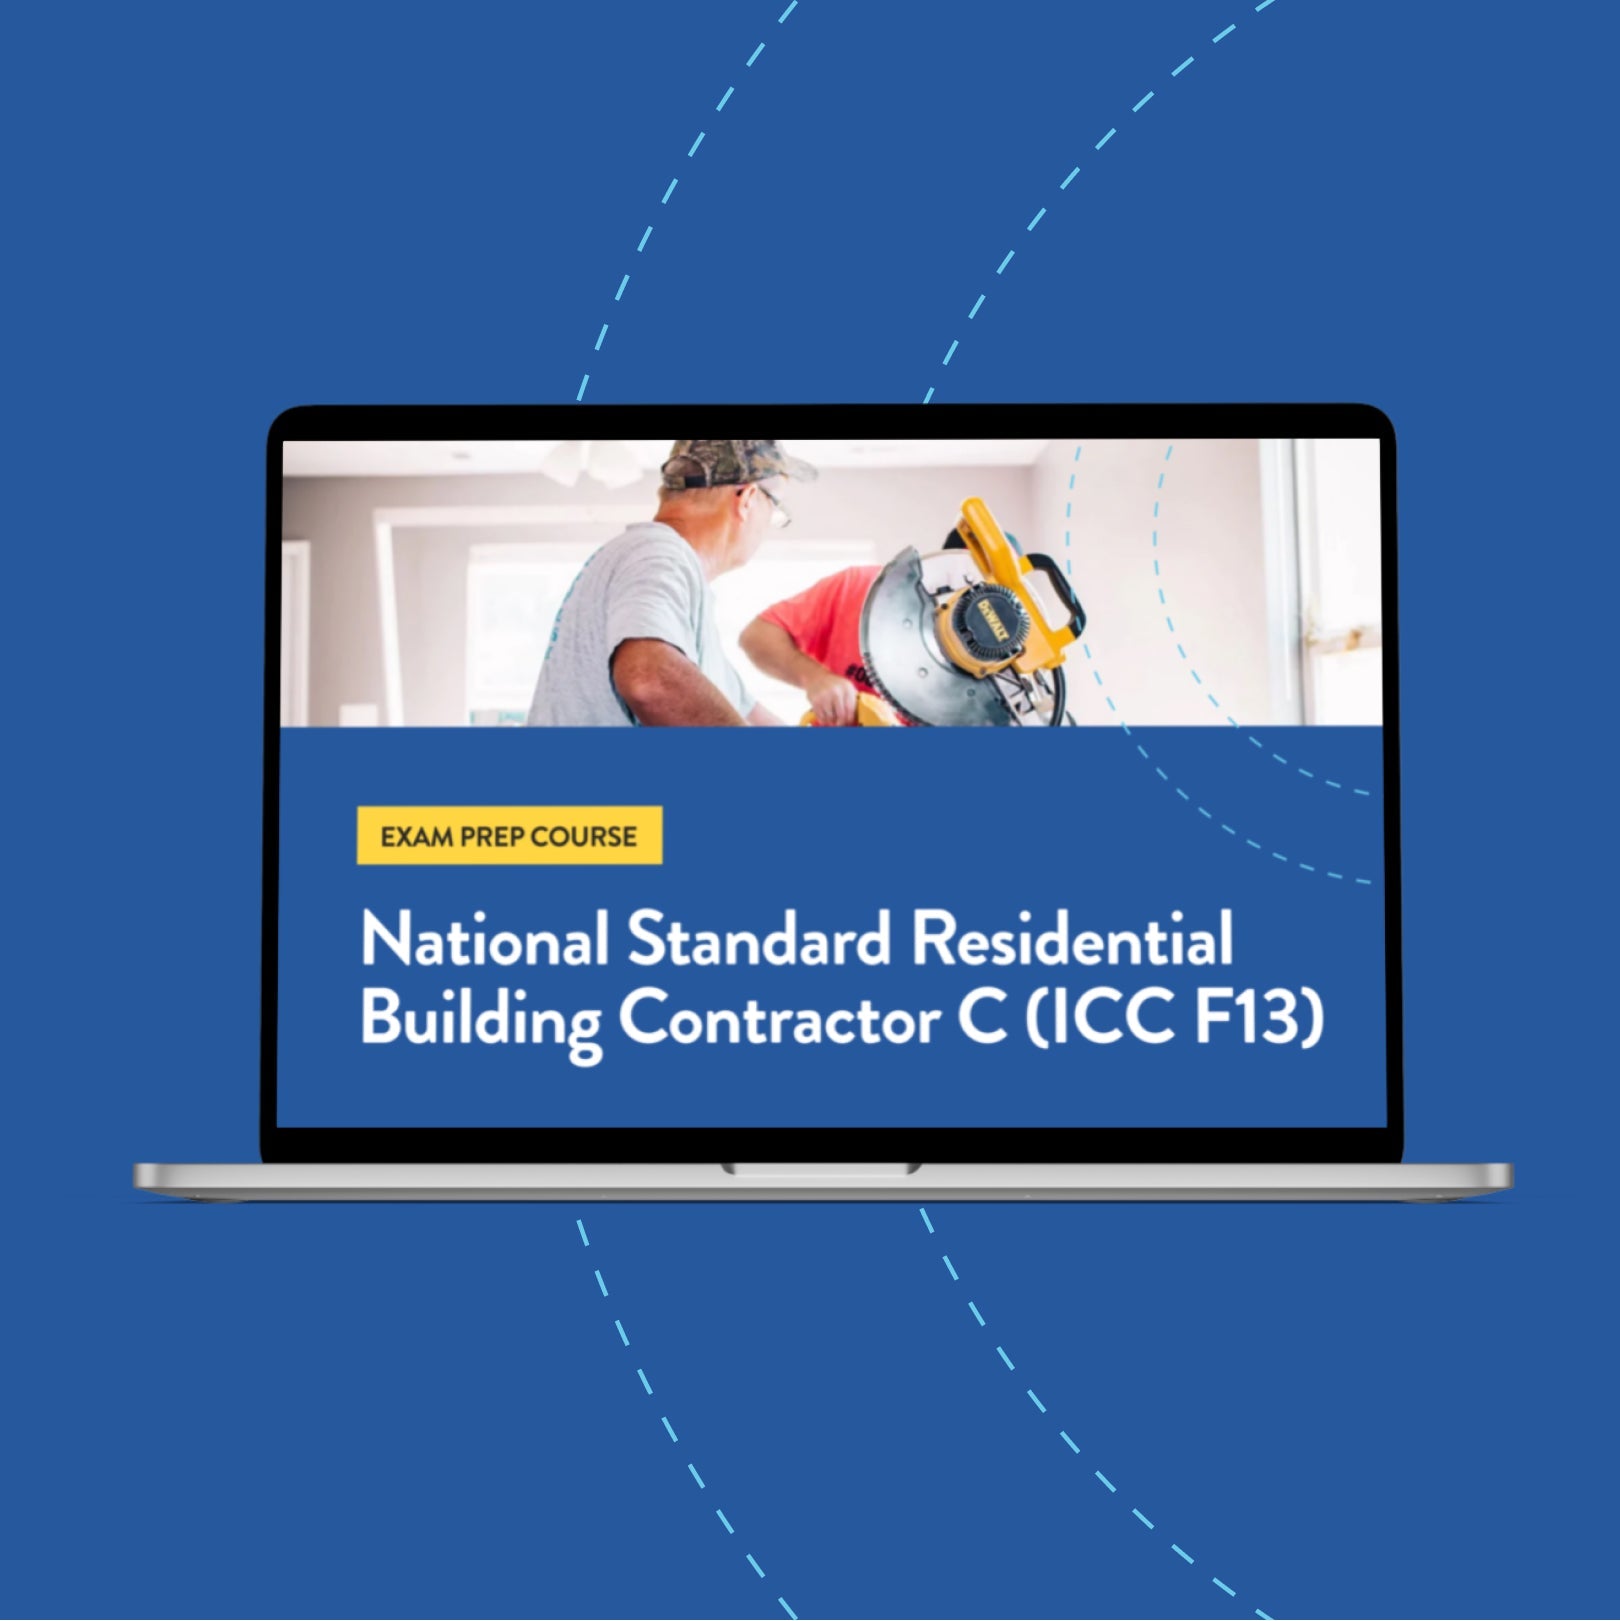 National Standard Residential Building Contractor C (ICC F13) Exam Prep Course